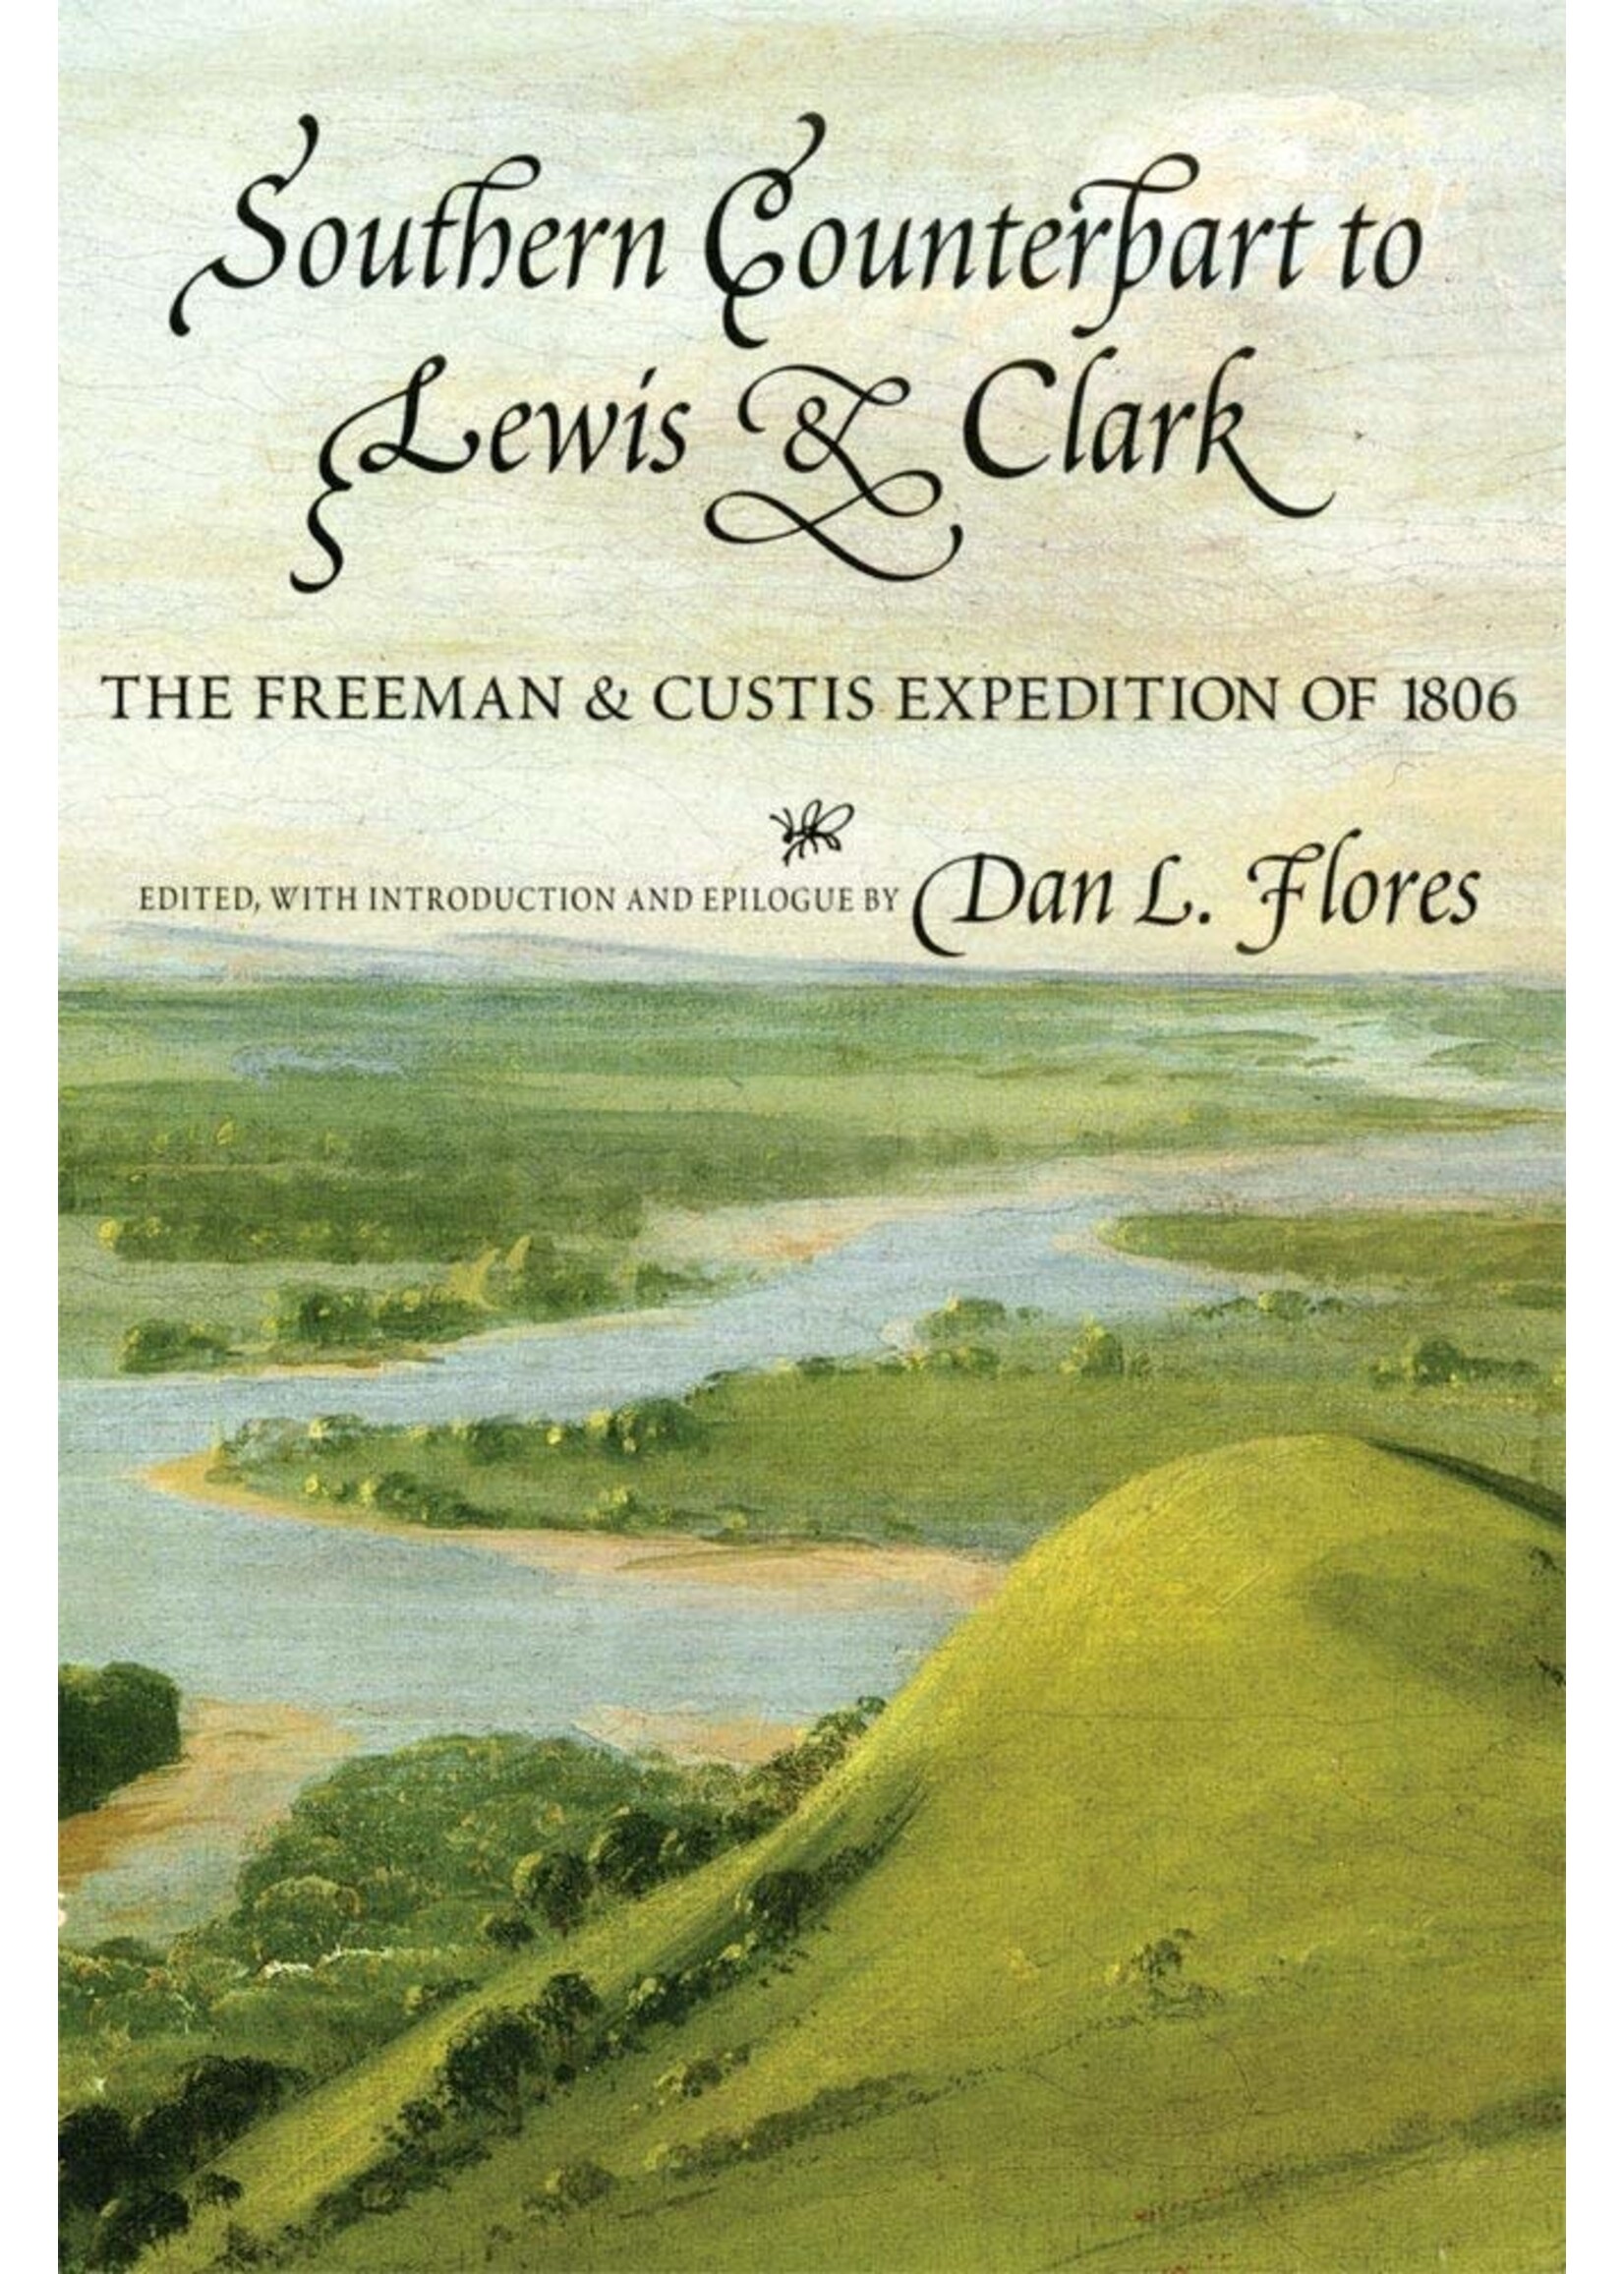 Southern Counterpart to Lewis & Clark: The Freeman and Custis Expedition of 1806